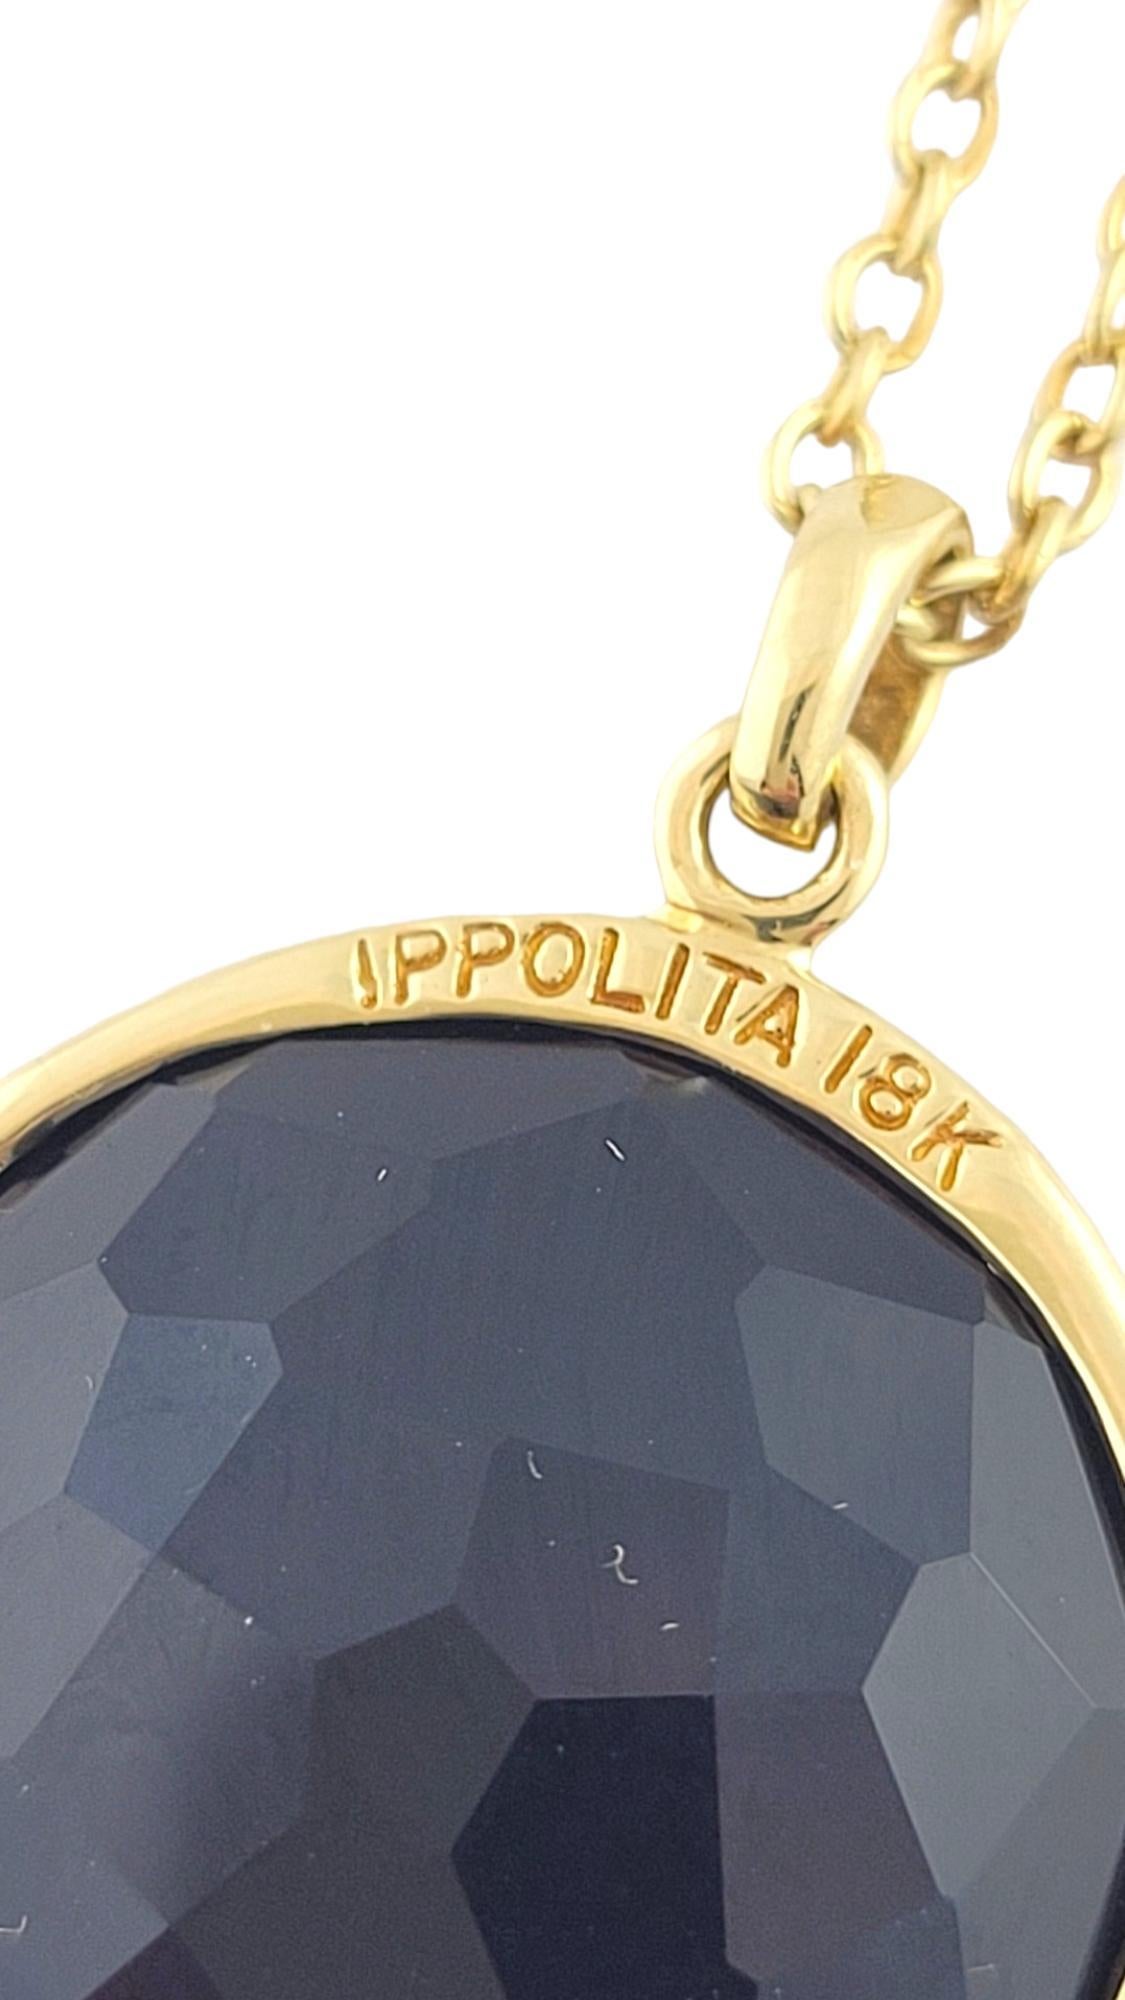 Ippolita 18K Yellow Gold Rock Candy Lollipop Black Onyx Necklace #16085 In Good Condition For Sale In Washington Depot, CT